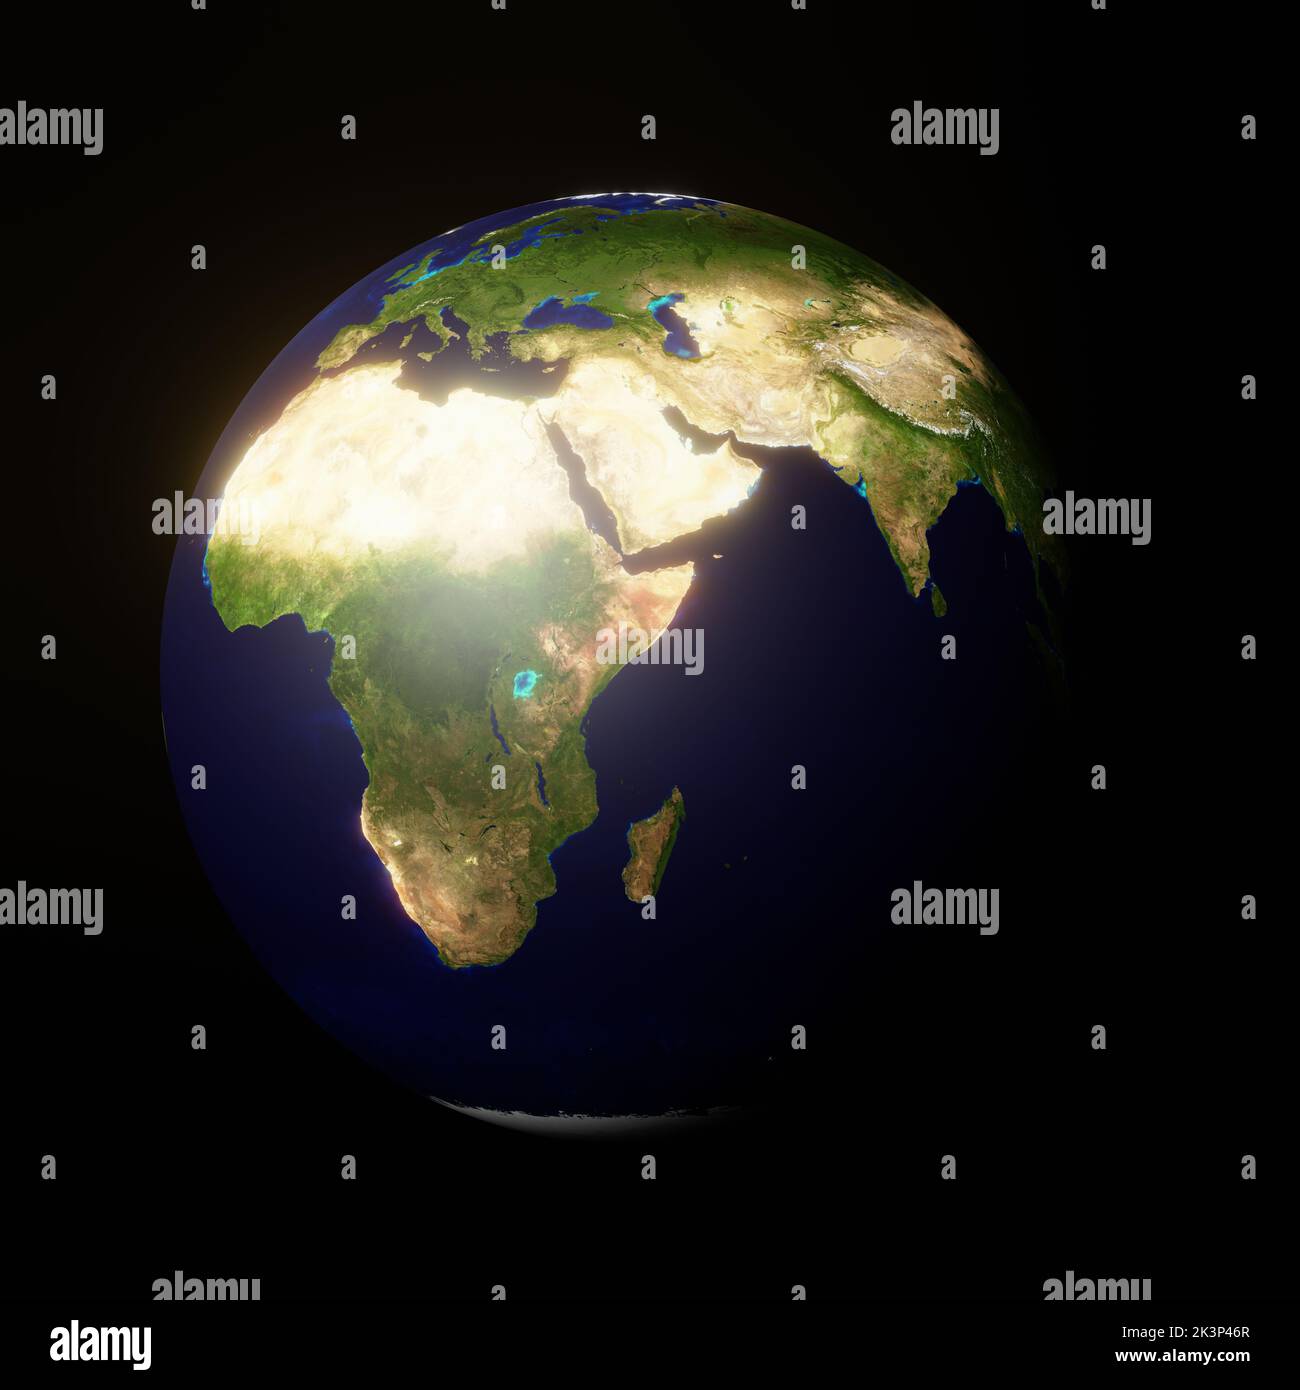 Globe earth 3d Illustration stock image Earth Map Satellite View Stock Photo